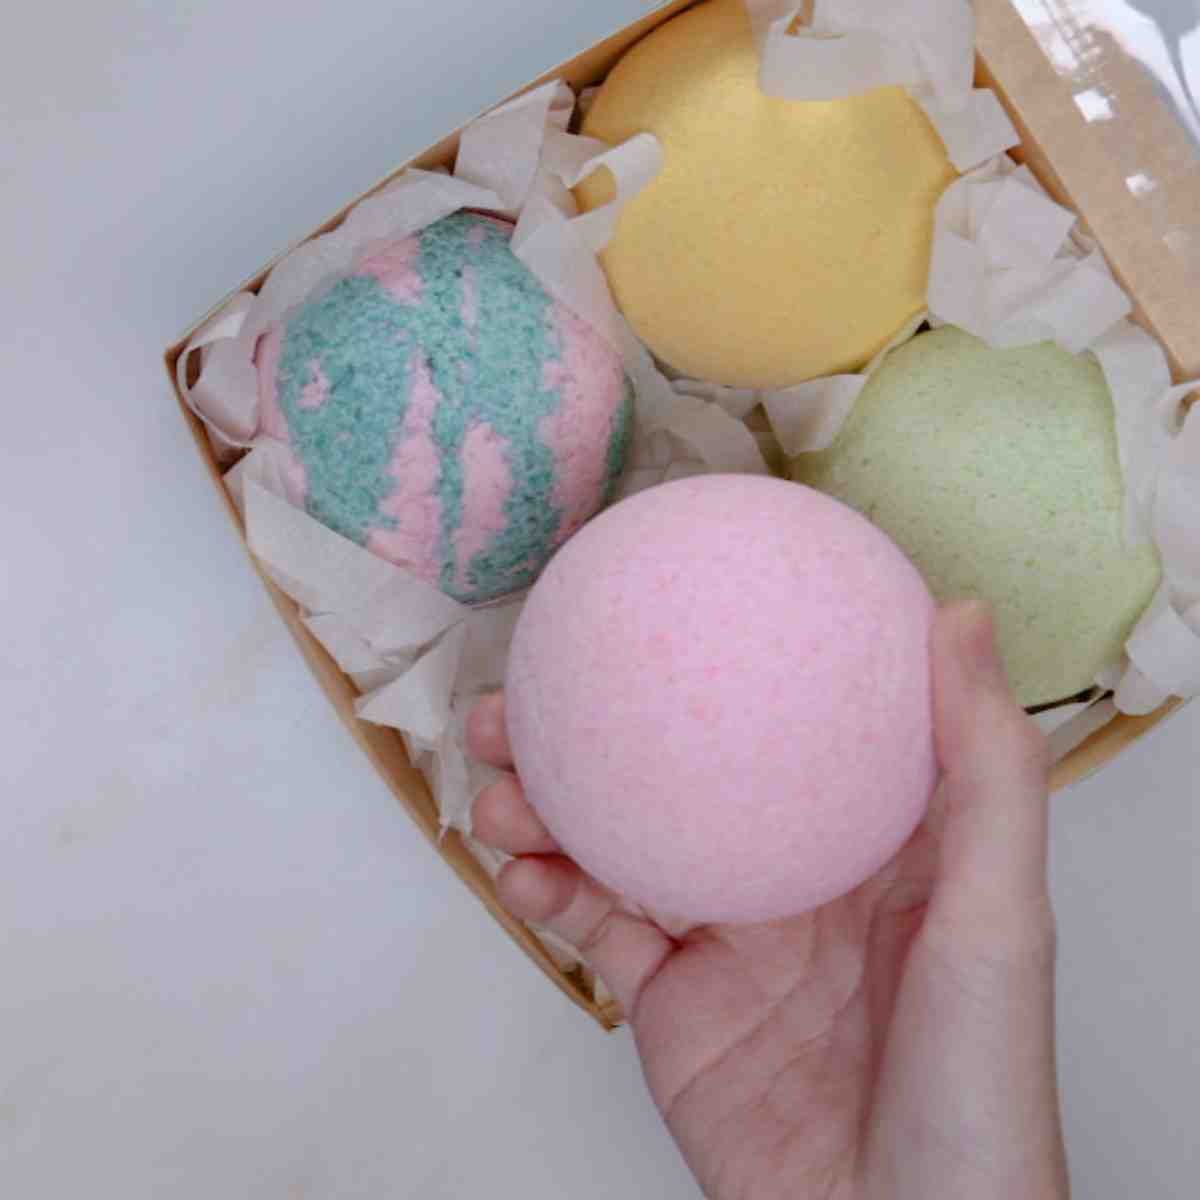 Holding Bath Bombs | DIY Bath Bombs For A More Bubbly and Lively Bath Experience 